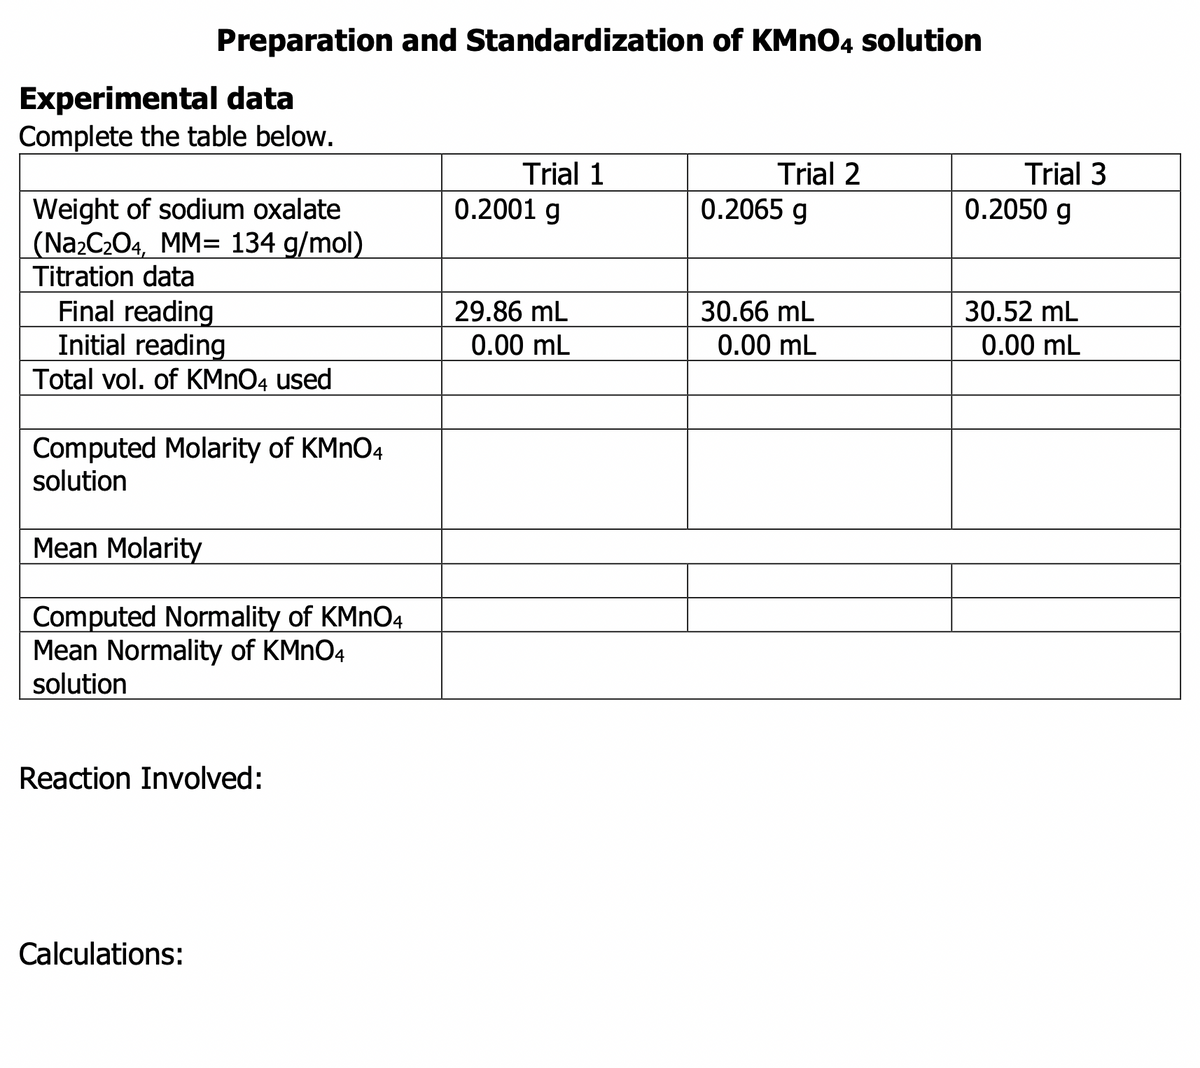 Preparation and Standardization of KMnO4 solution
Experimental data
Complete the table below.
Trial 1
0.2001 g
Trial 2
0.2065 g
Trial 3
Weight of sodium oxalate
(Na2C2O4, MM= 134 g/mol)
Titration data
0.2050 g
Final reading
Initial reading
29.86 mL
0.00 mL
30.66 mL
30.52 mL
0.00 mL
0.00 mL
Total vol. of KMNO4 used
Computed Molarity of KMNO4
solution
Mean Molarity
Computed Normality of KMNO4
Mean Normality of KMNO4
solution
Reaction Involved:
Calculations:
